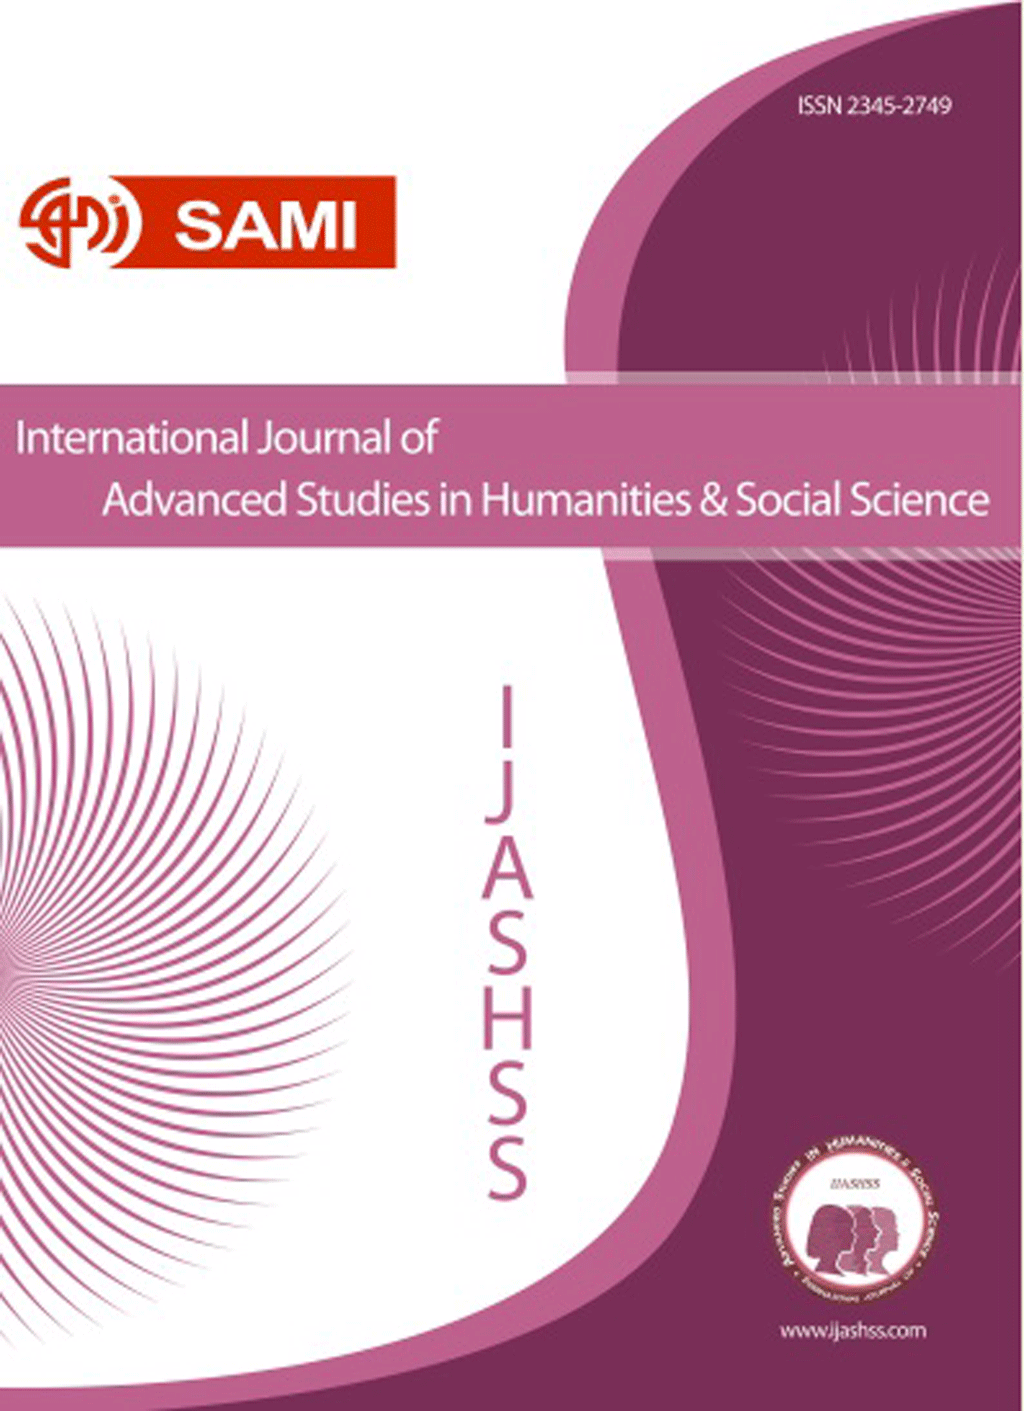 International Journal of Advanced Studies in Humanities and Social Science - January 2016, Volume 5 -  Issue 1